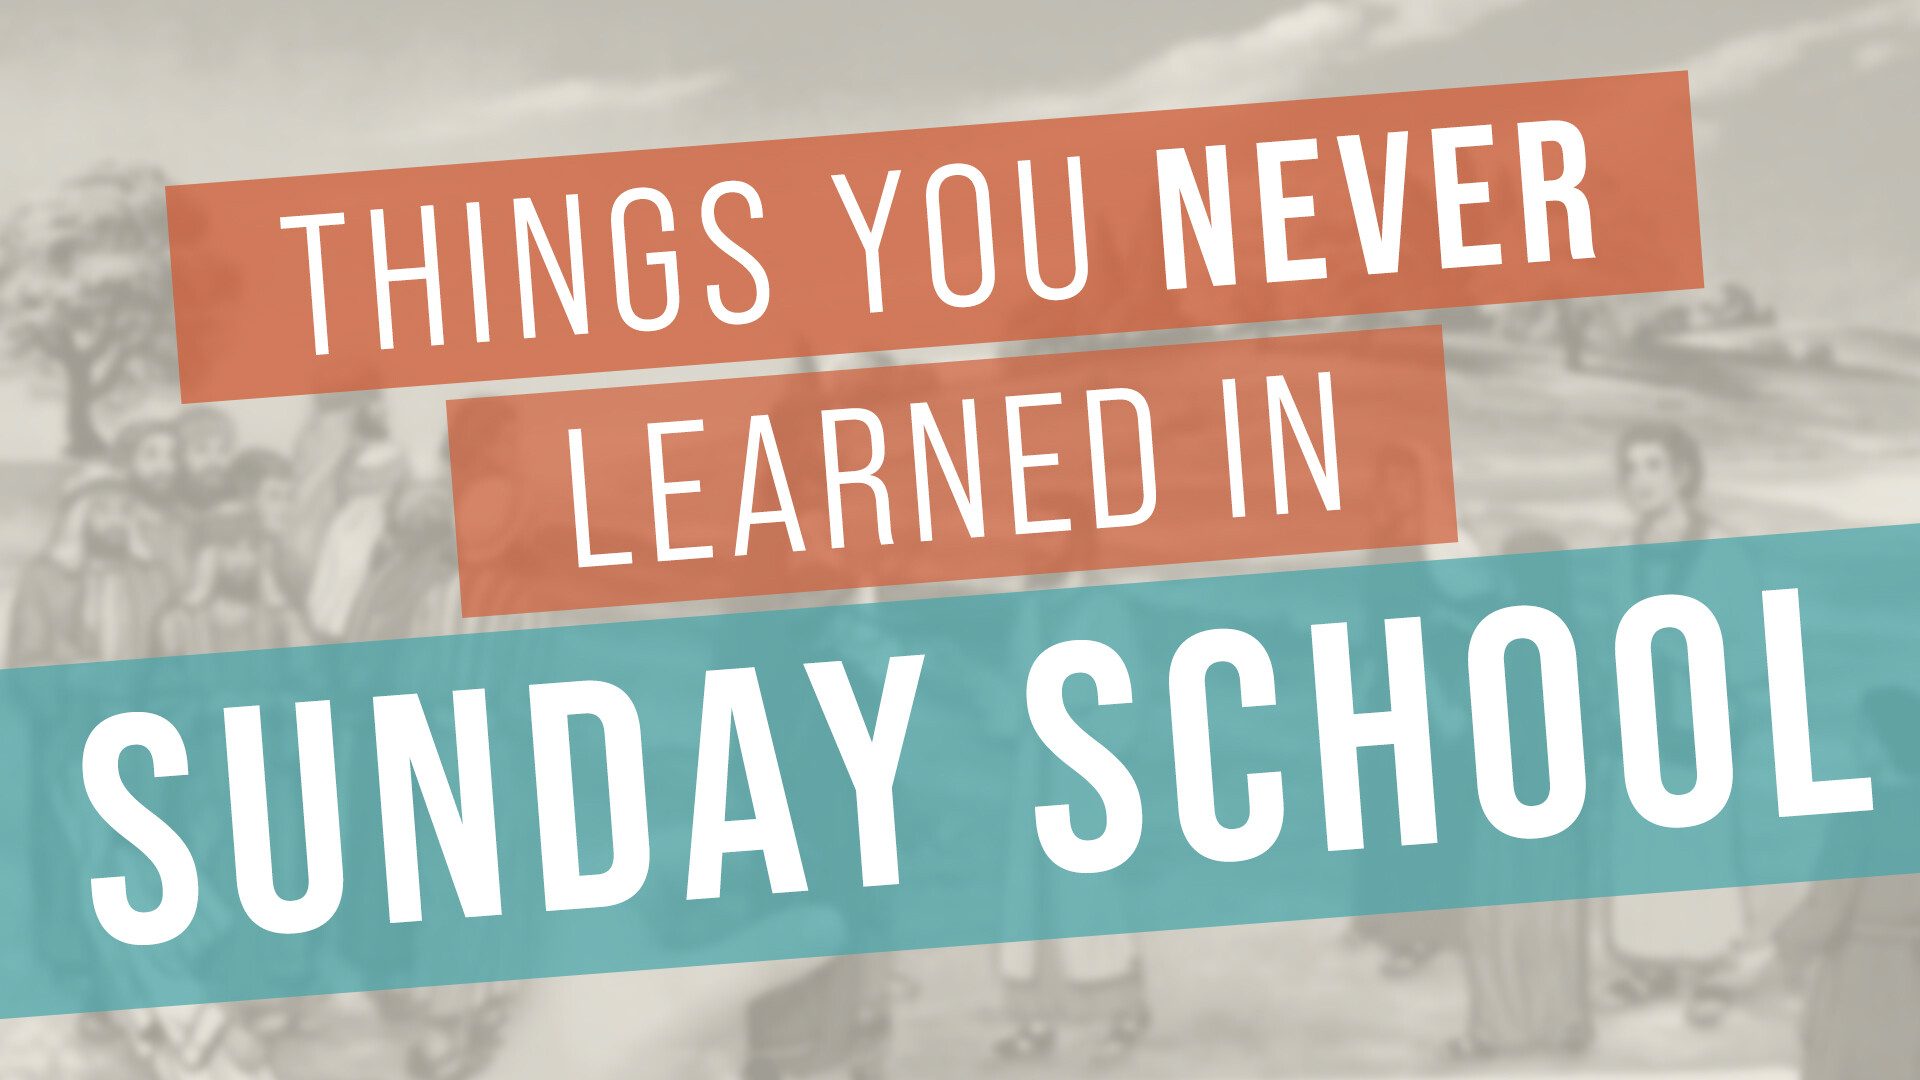 Things You Never Learned in Sunday School